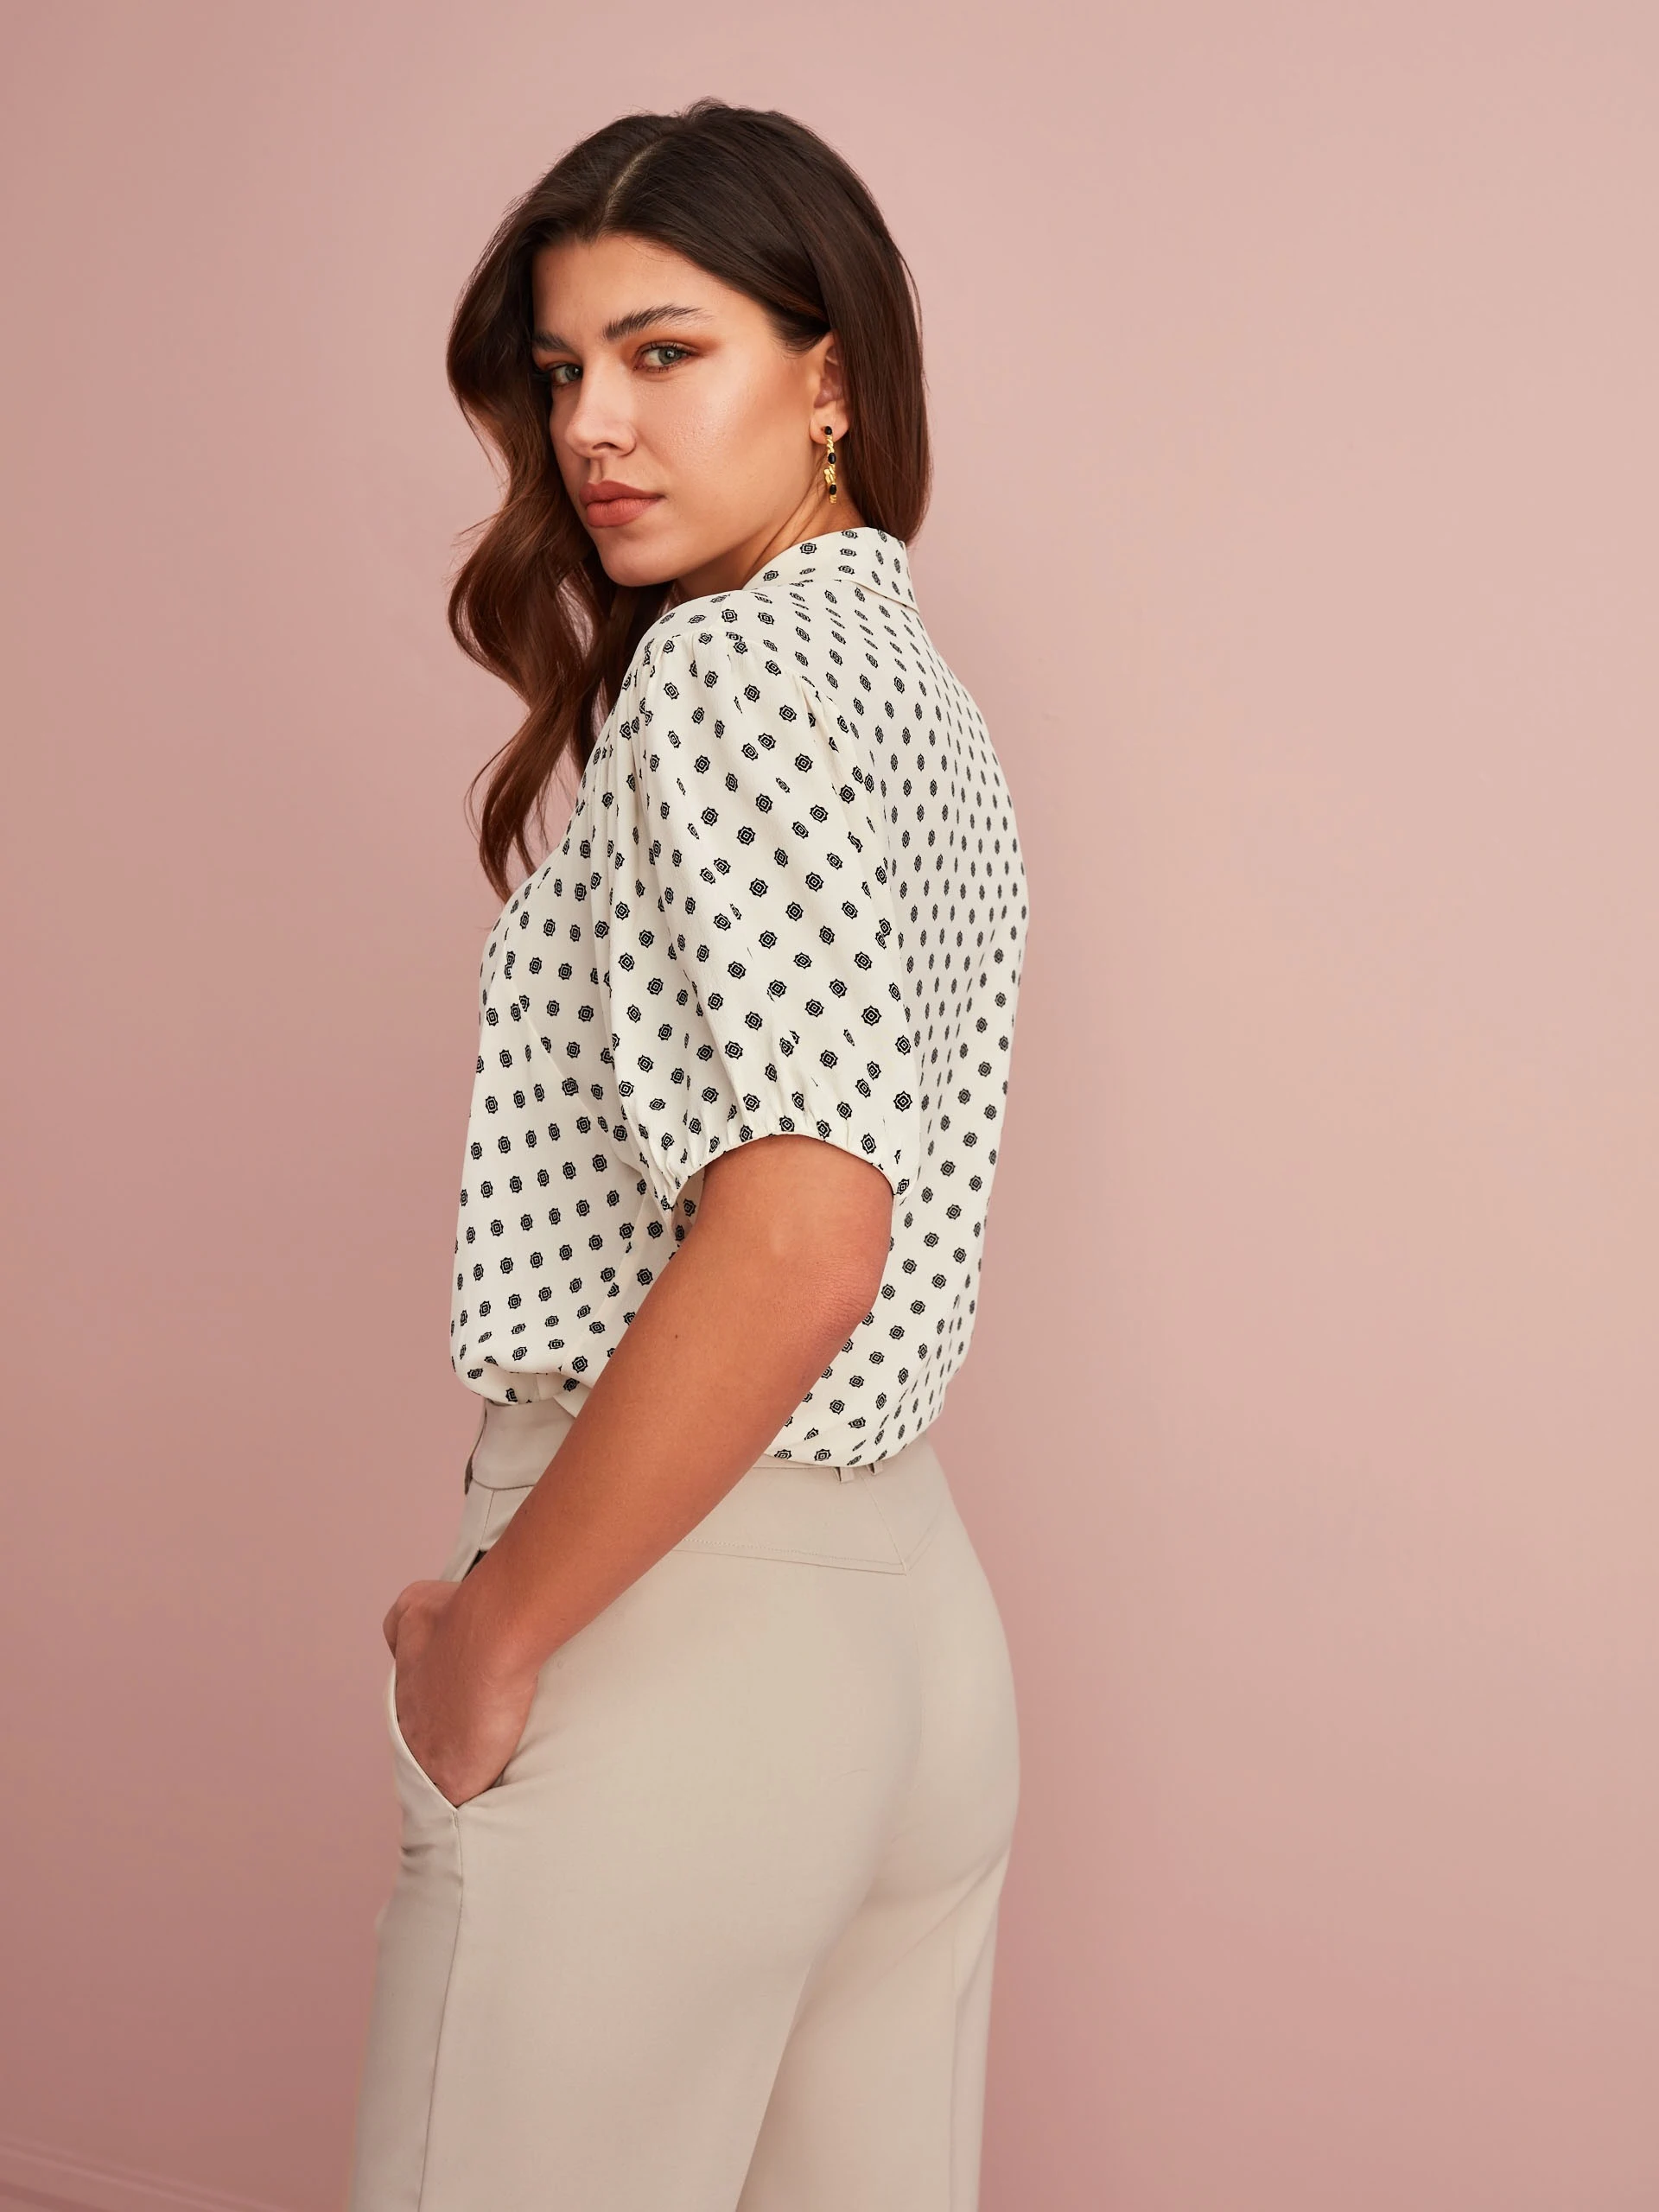 WHITE BLOUSE WITH A FINE PATTERN